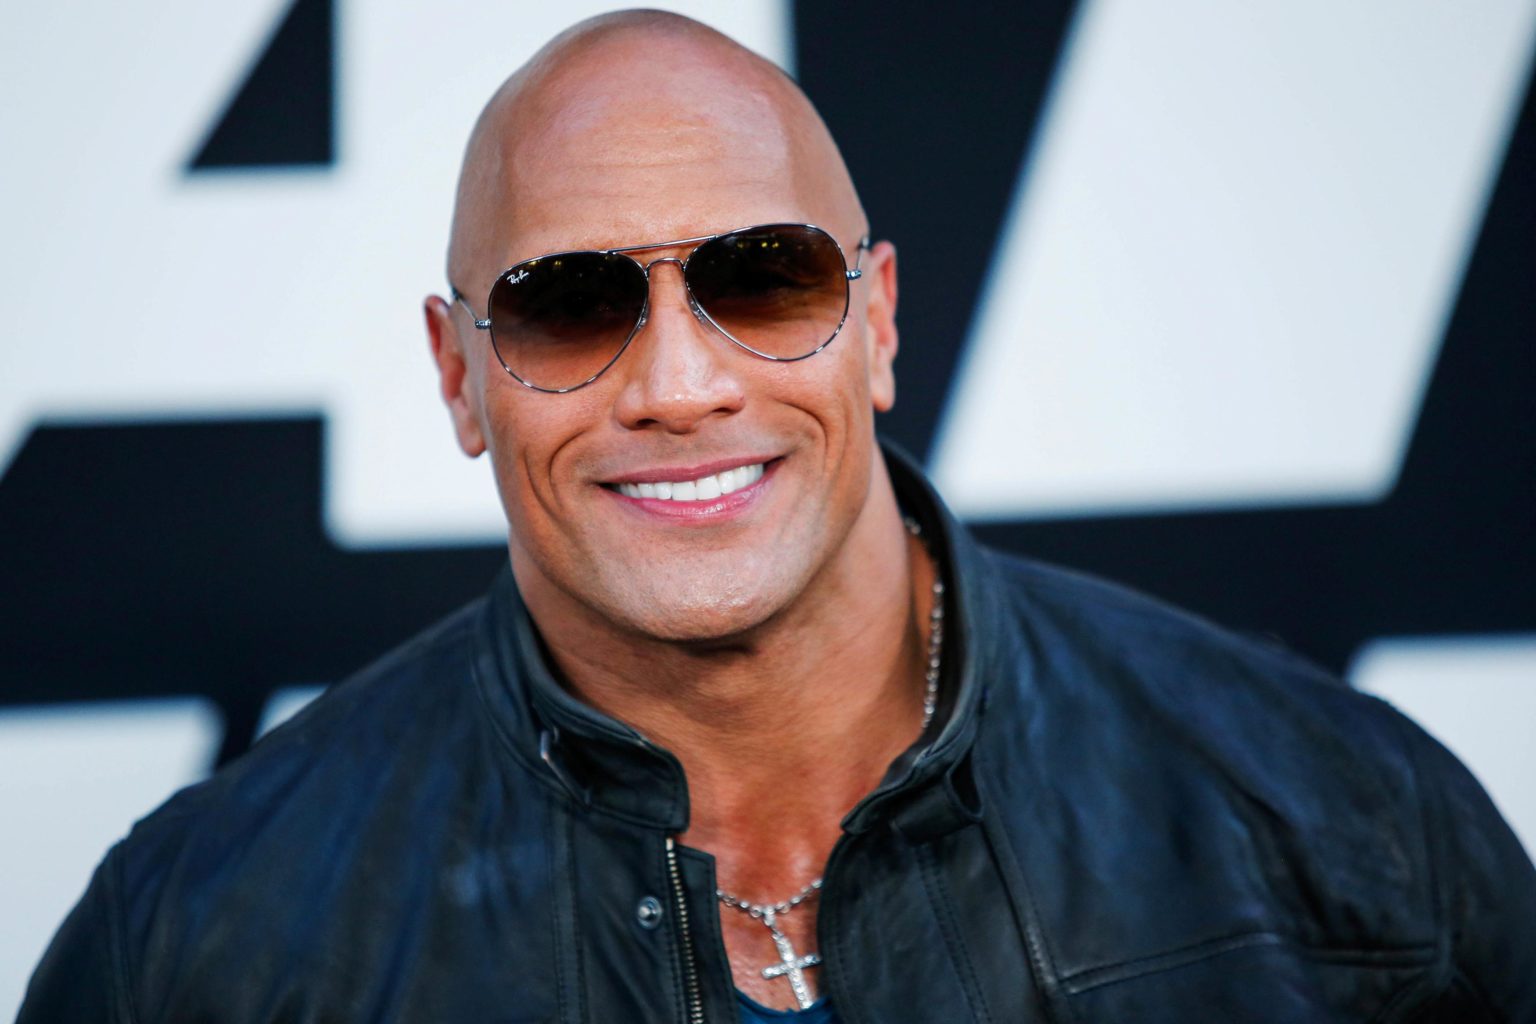 THE ROCK SHARED PICTURES FROM HIS UPCOMING MOVIE 'RED NOTICE' - Maven Buzz